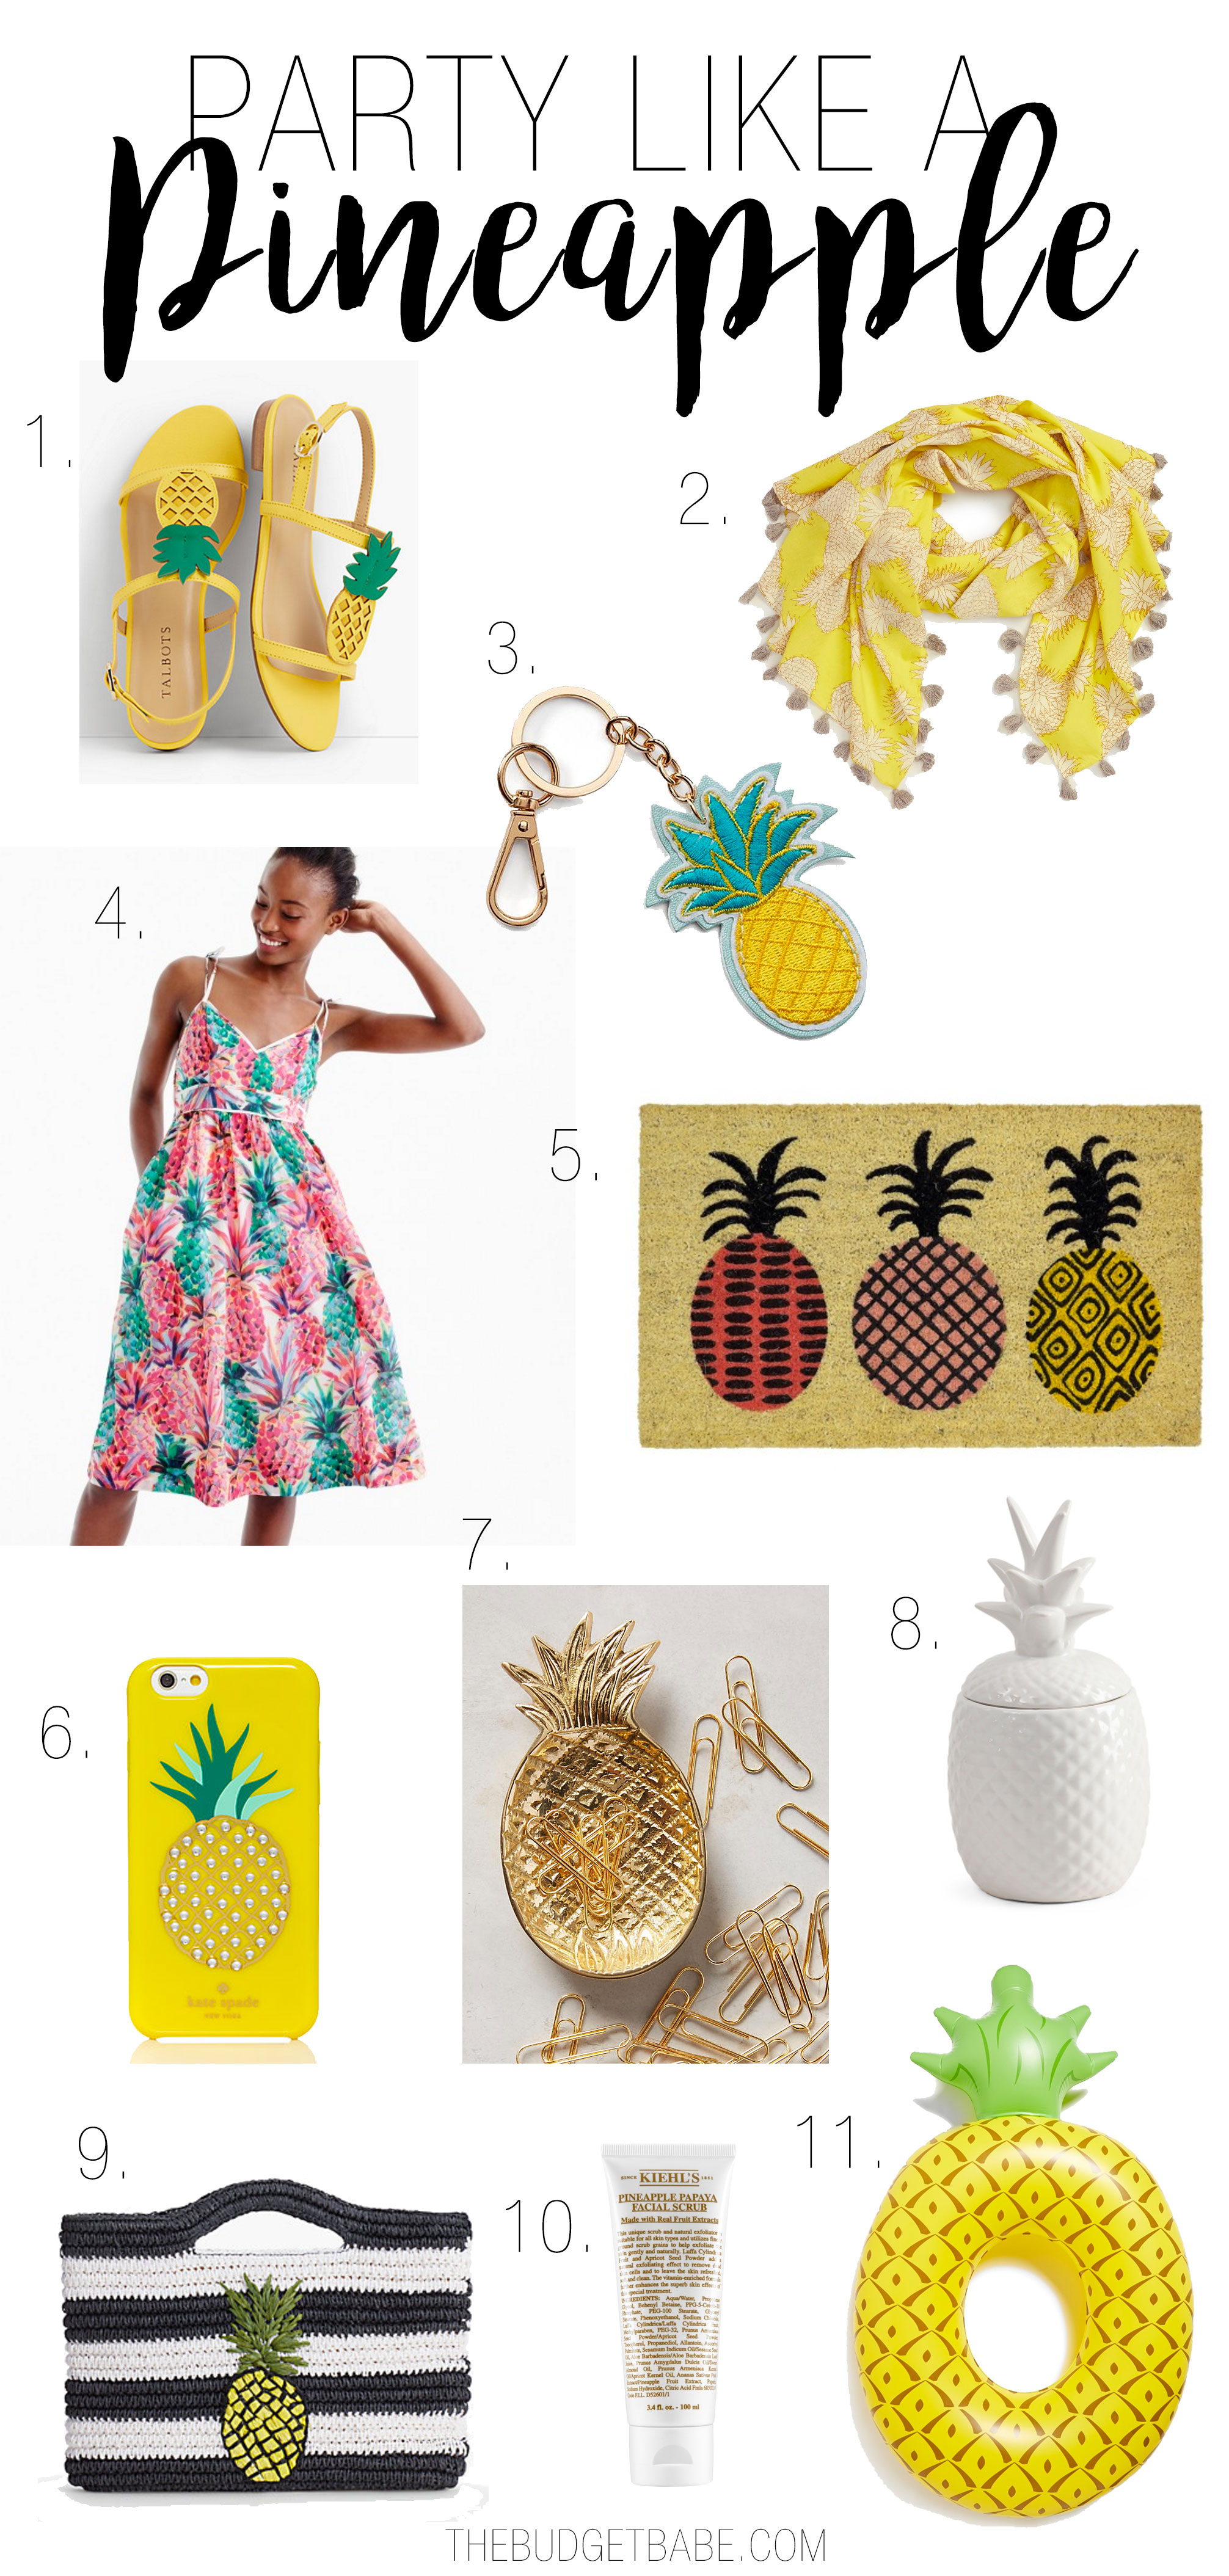 Party like a pineapple with these fun fashions, home decor items and more inspired by everyone's favorite tropical fruit.